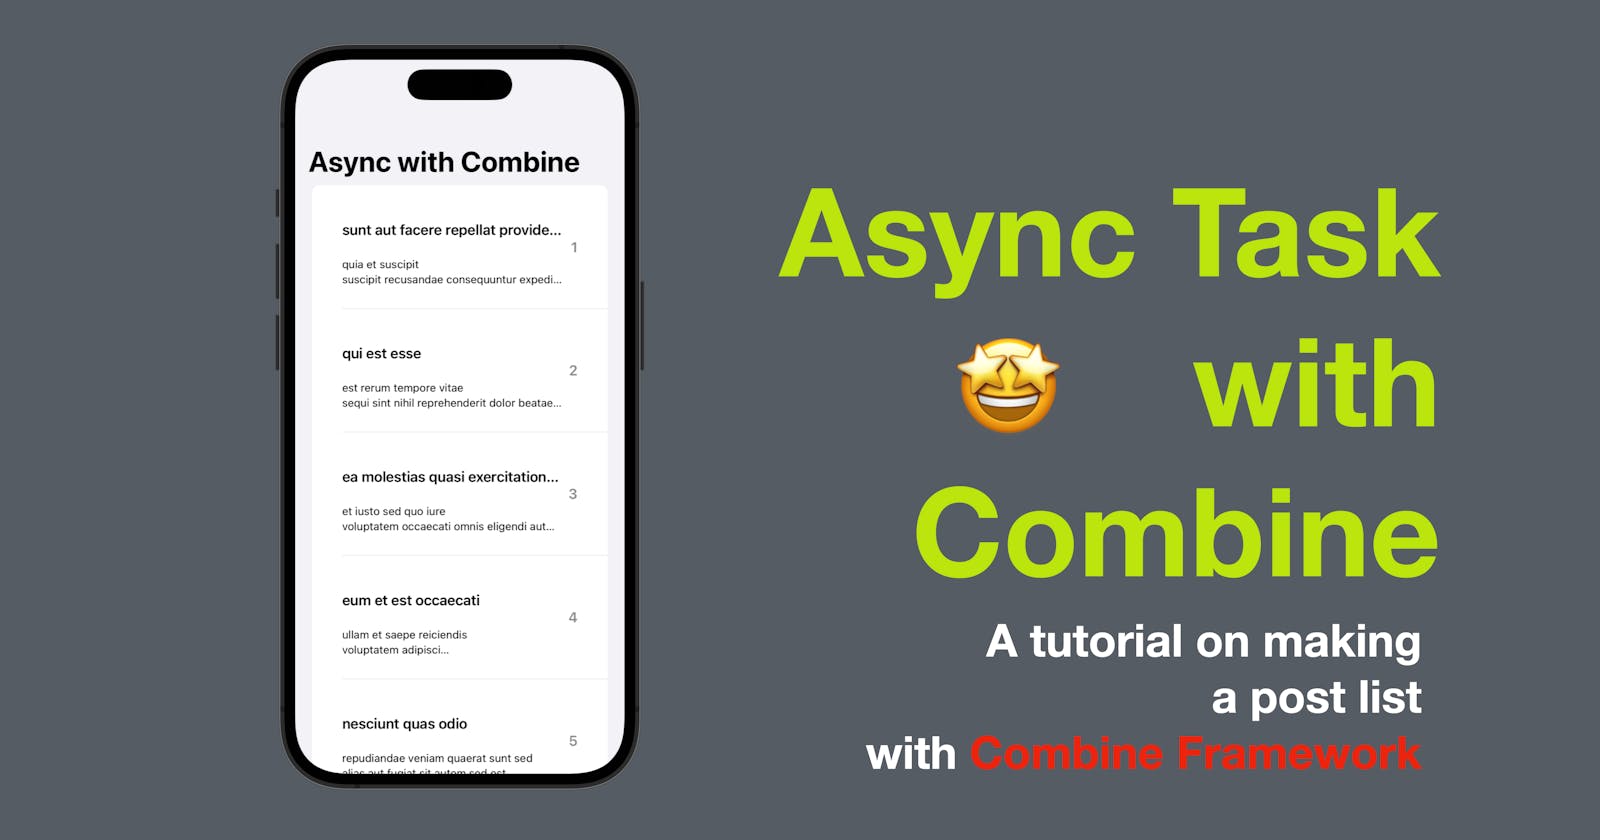 Async Task with Combine in SwiftUI